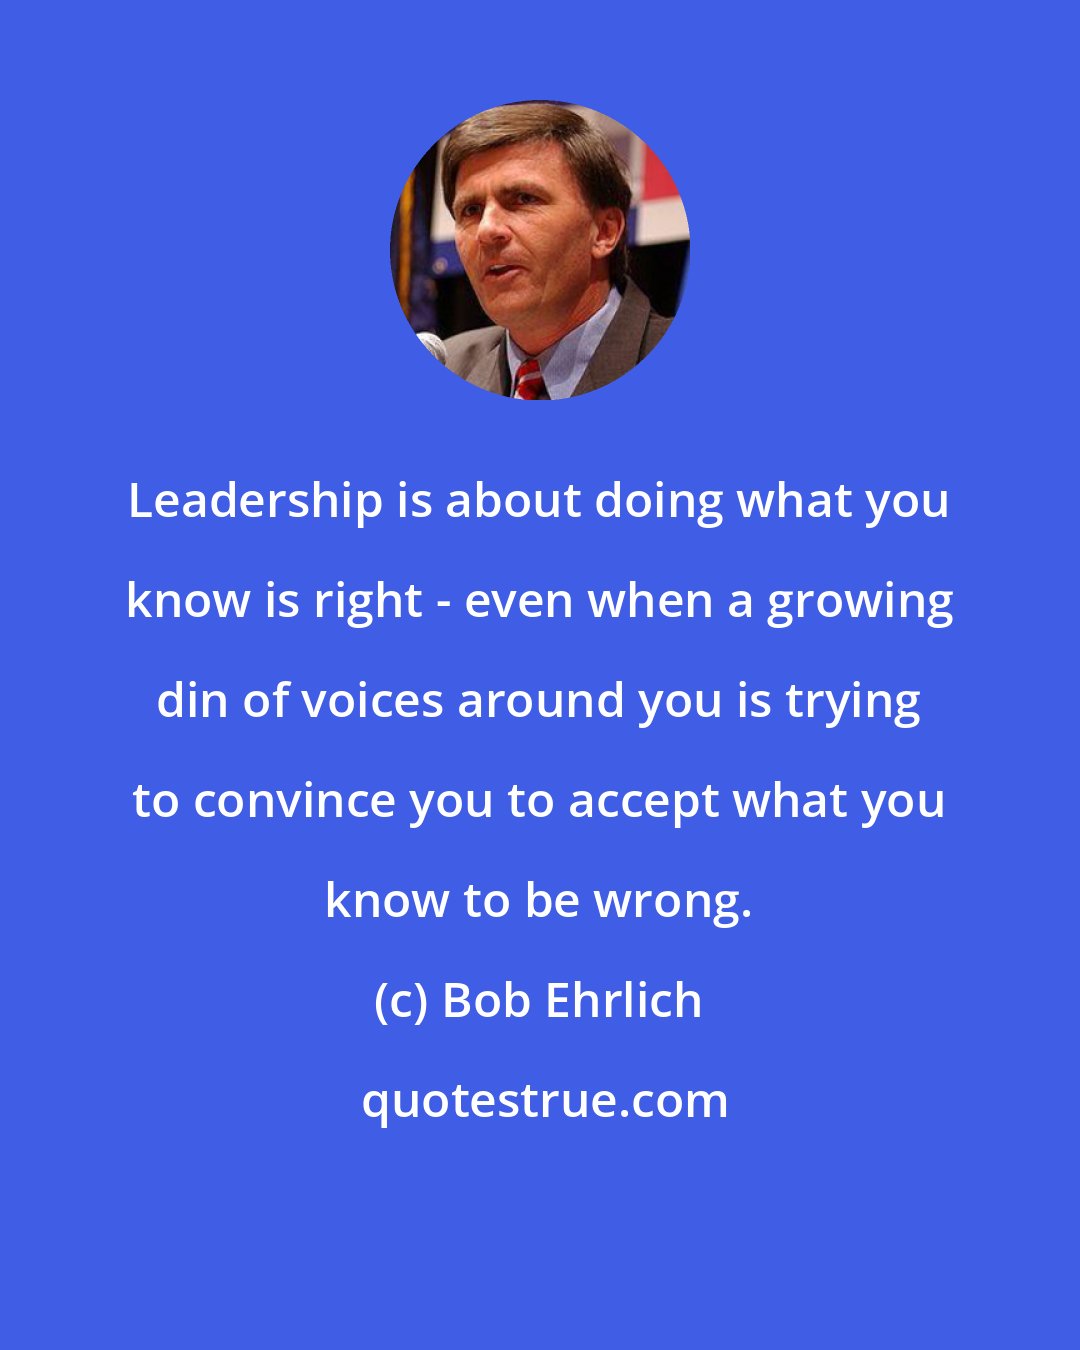 Bob Ehrlich: Leadership is about doing what you know is right - even when a growing din of voices around you is trying to convince you to accept what you know to be wrong.